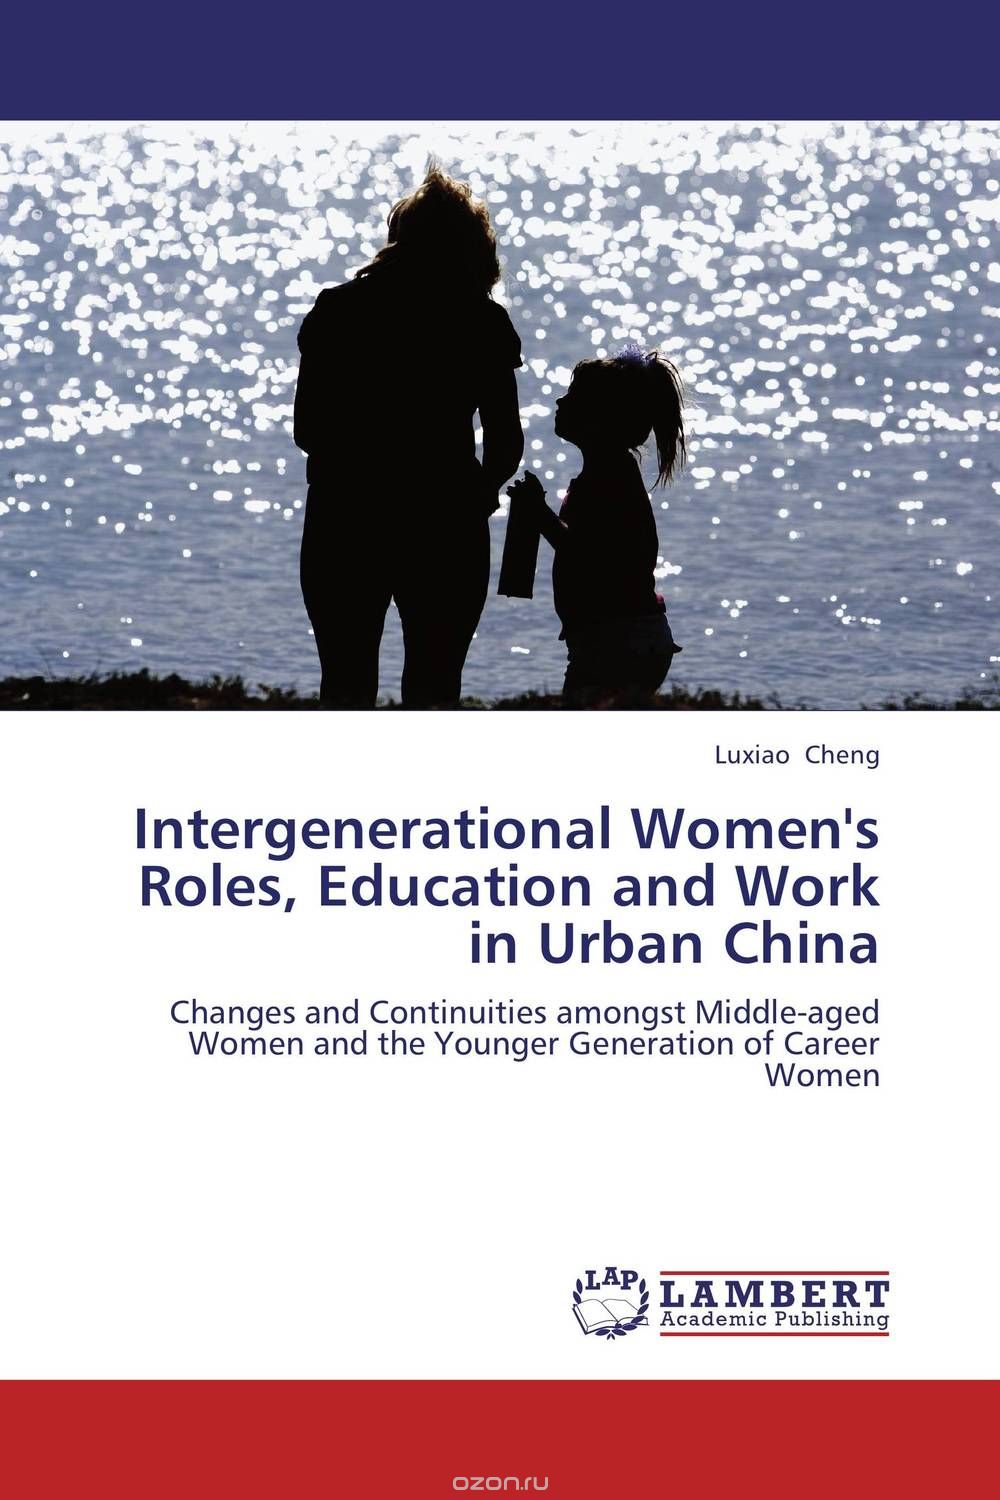 Intergenerational Women's Roles, Education and Work in Urban China